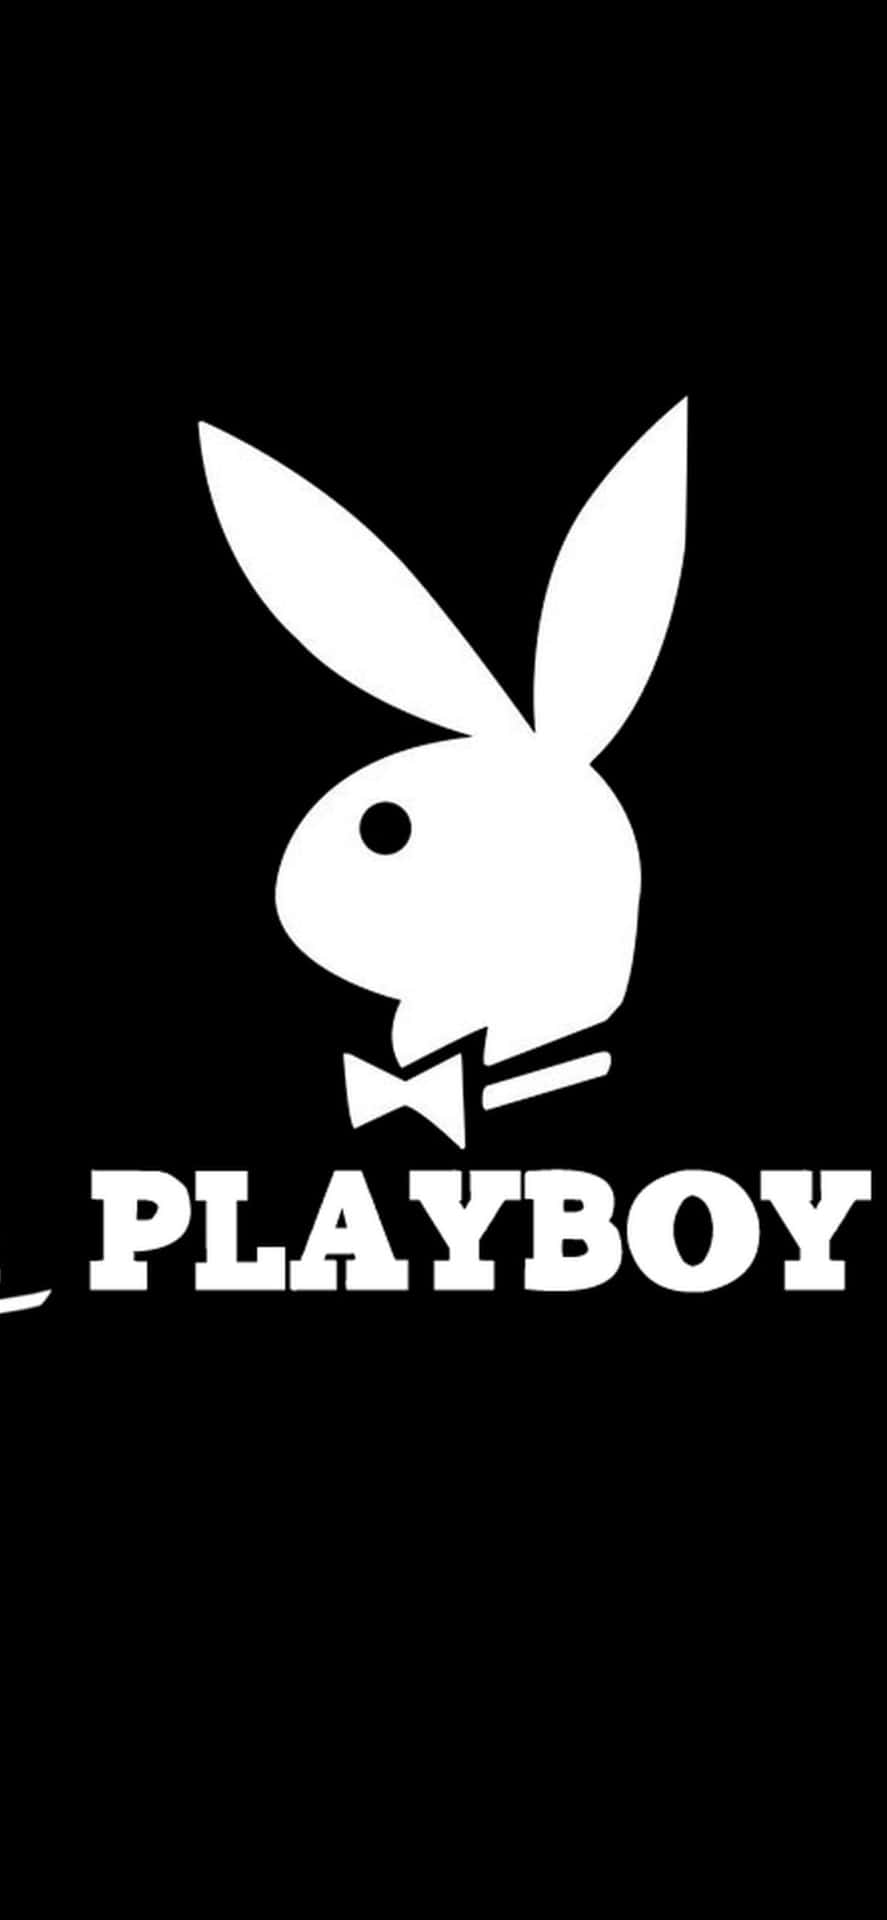 Playboy's Best Cover Models